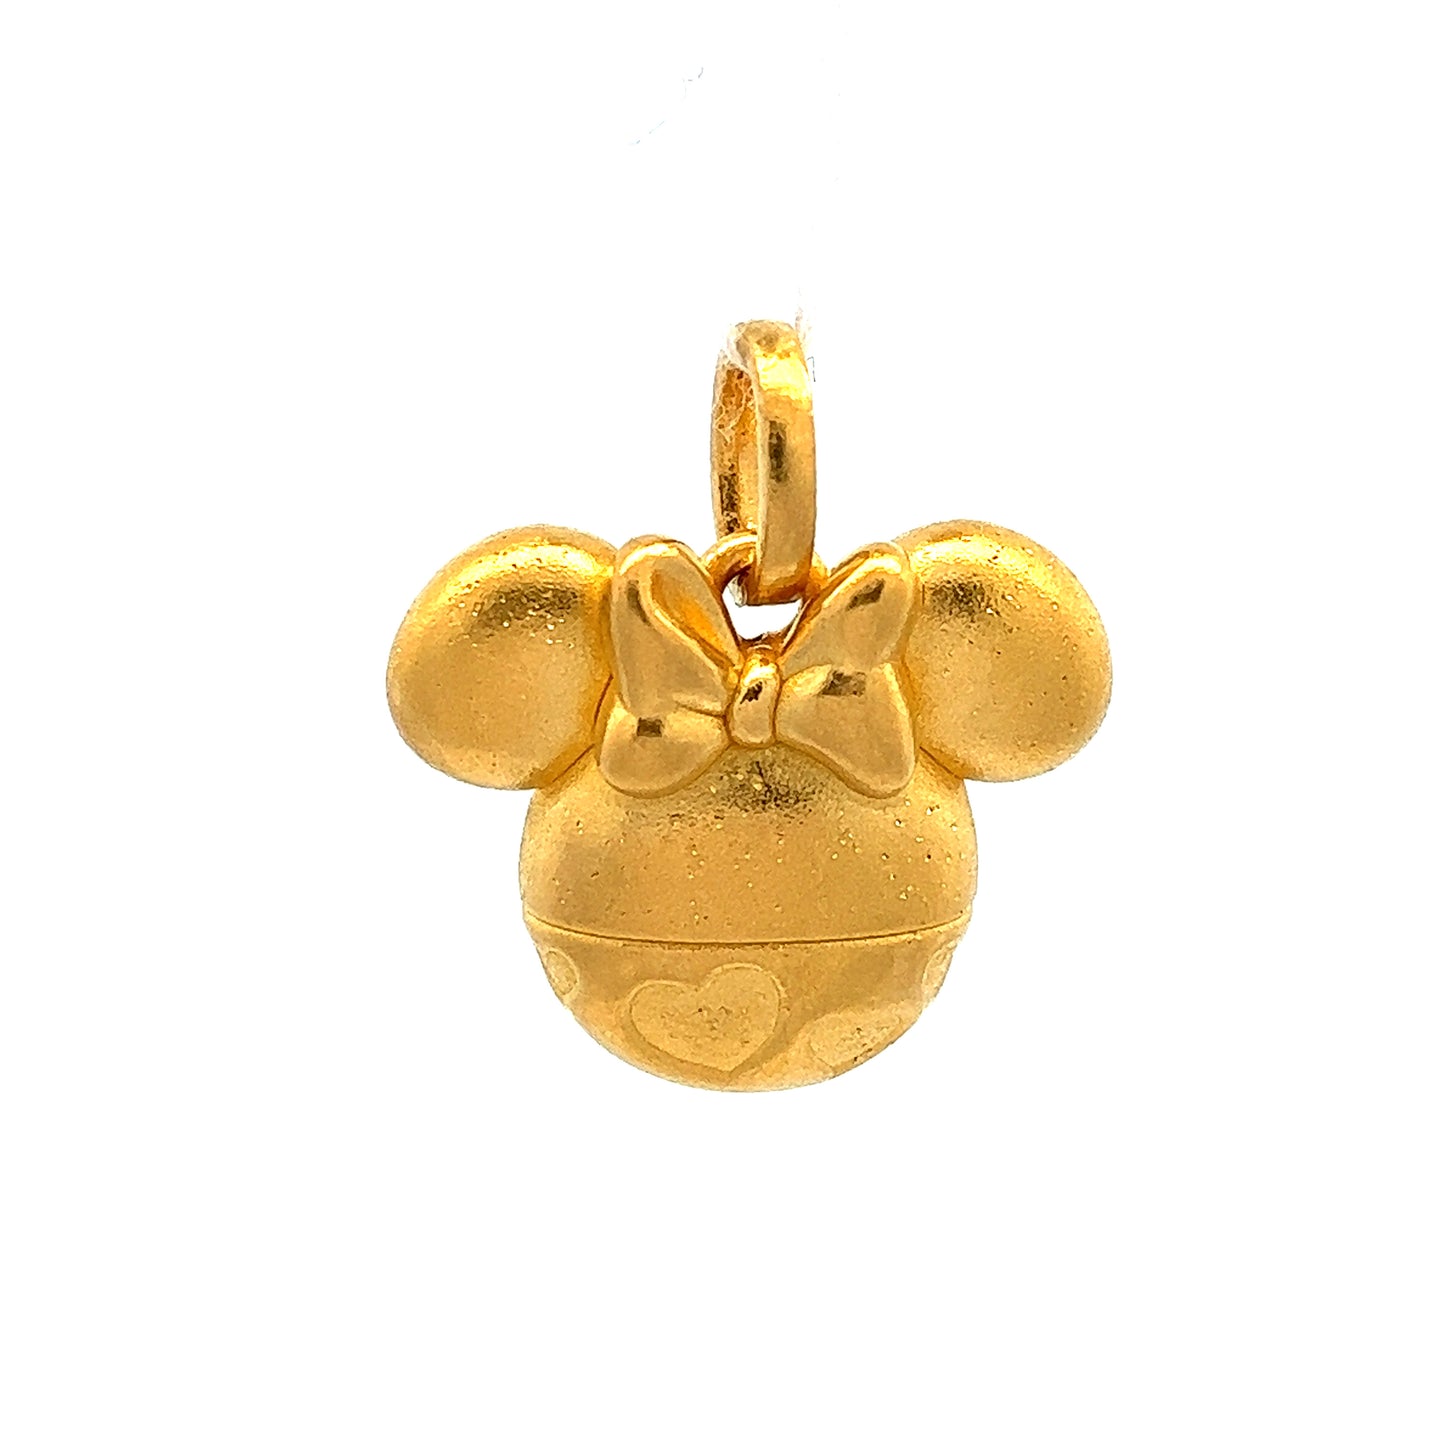 GOLD PENDANT ( 24K ) ( 1.78g ) - 0014628 Chain sold separately